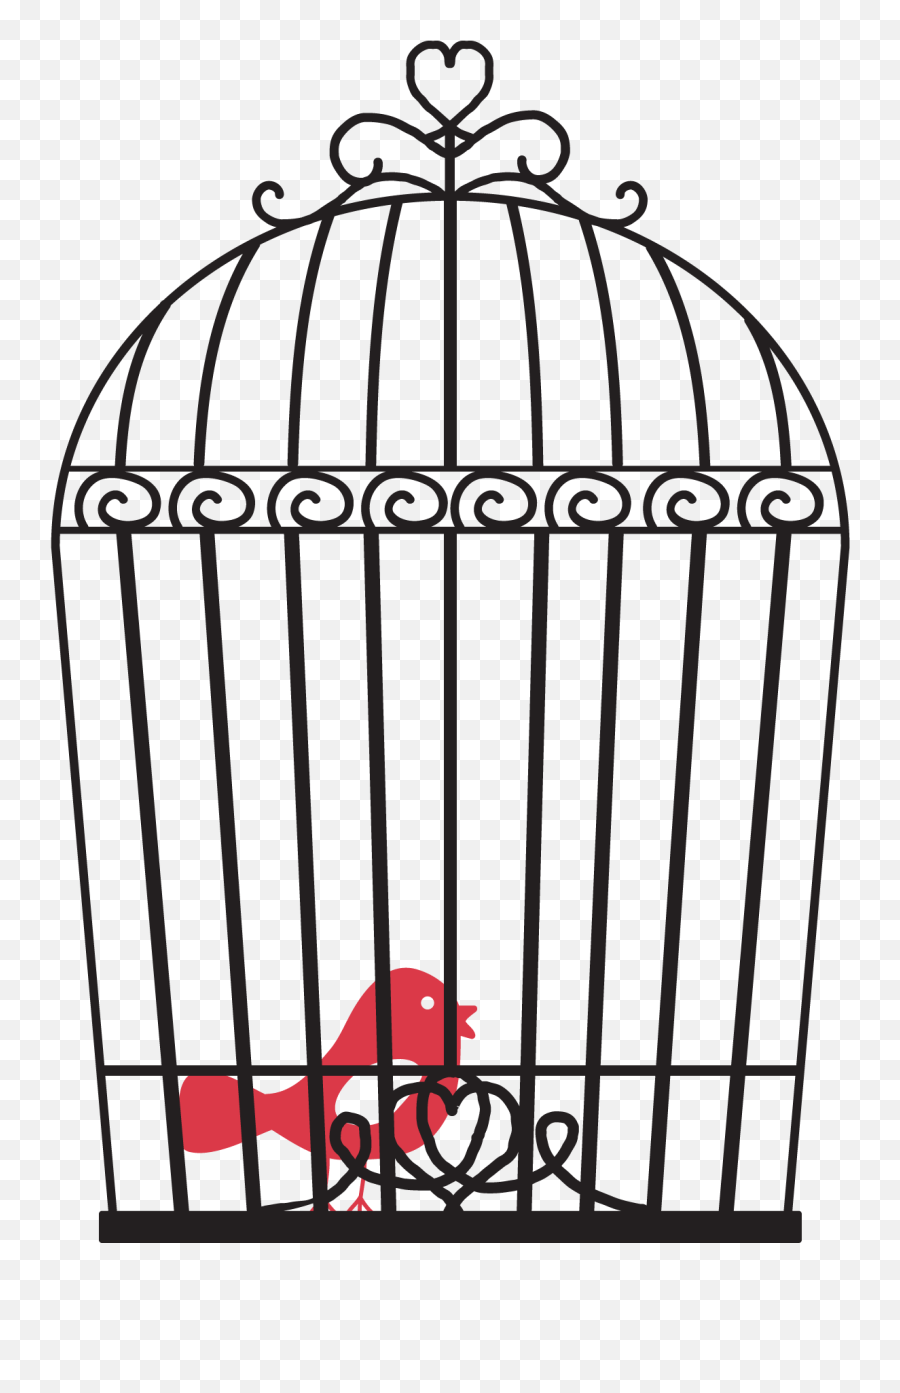 Download Cage Bird Png Image For Free - Birdcage,Cage Png